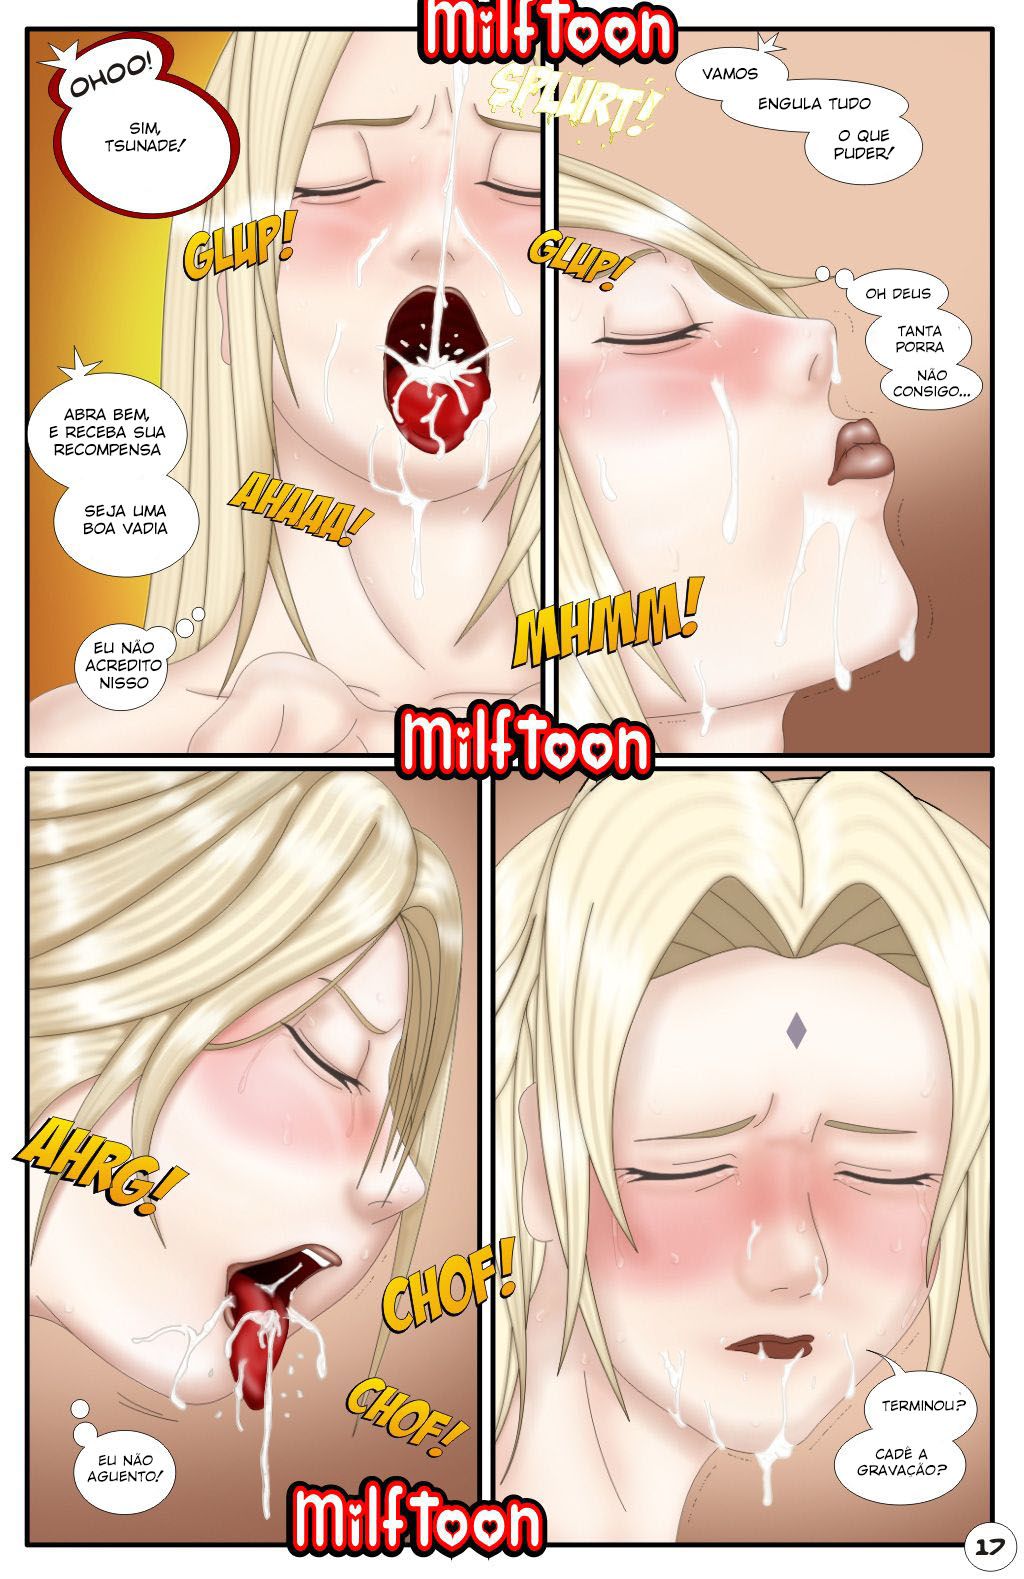 Naruto by Milftoon Hentai pt-br 17